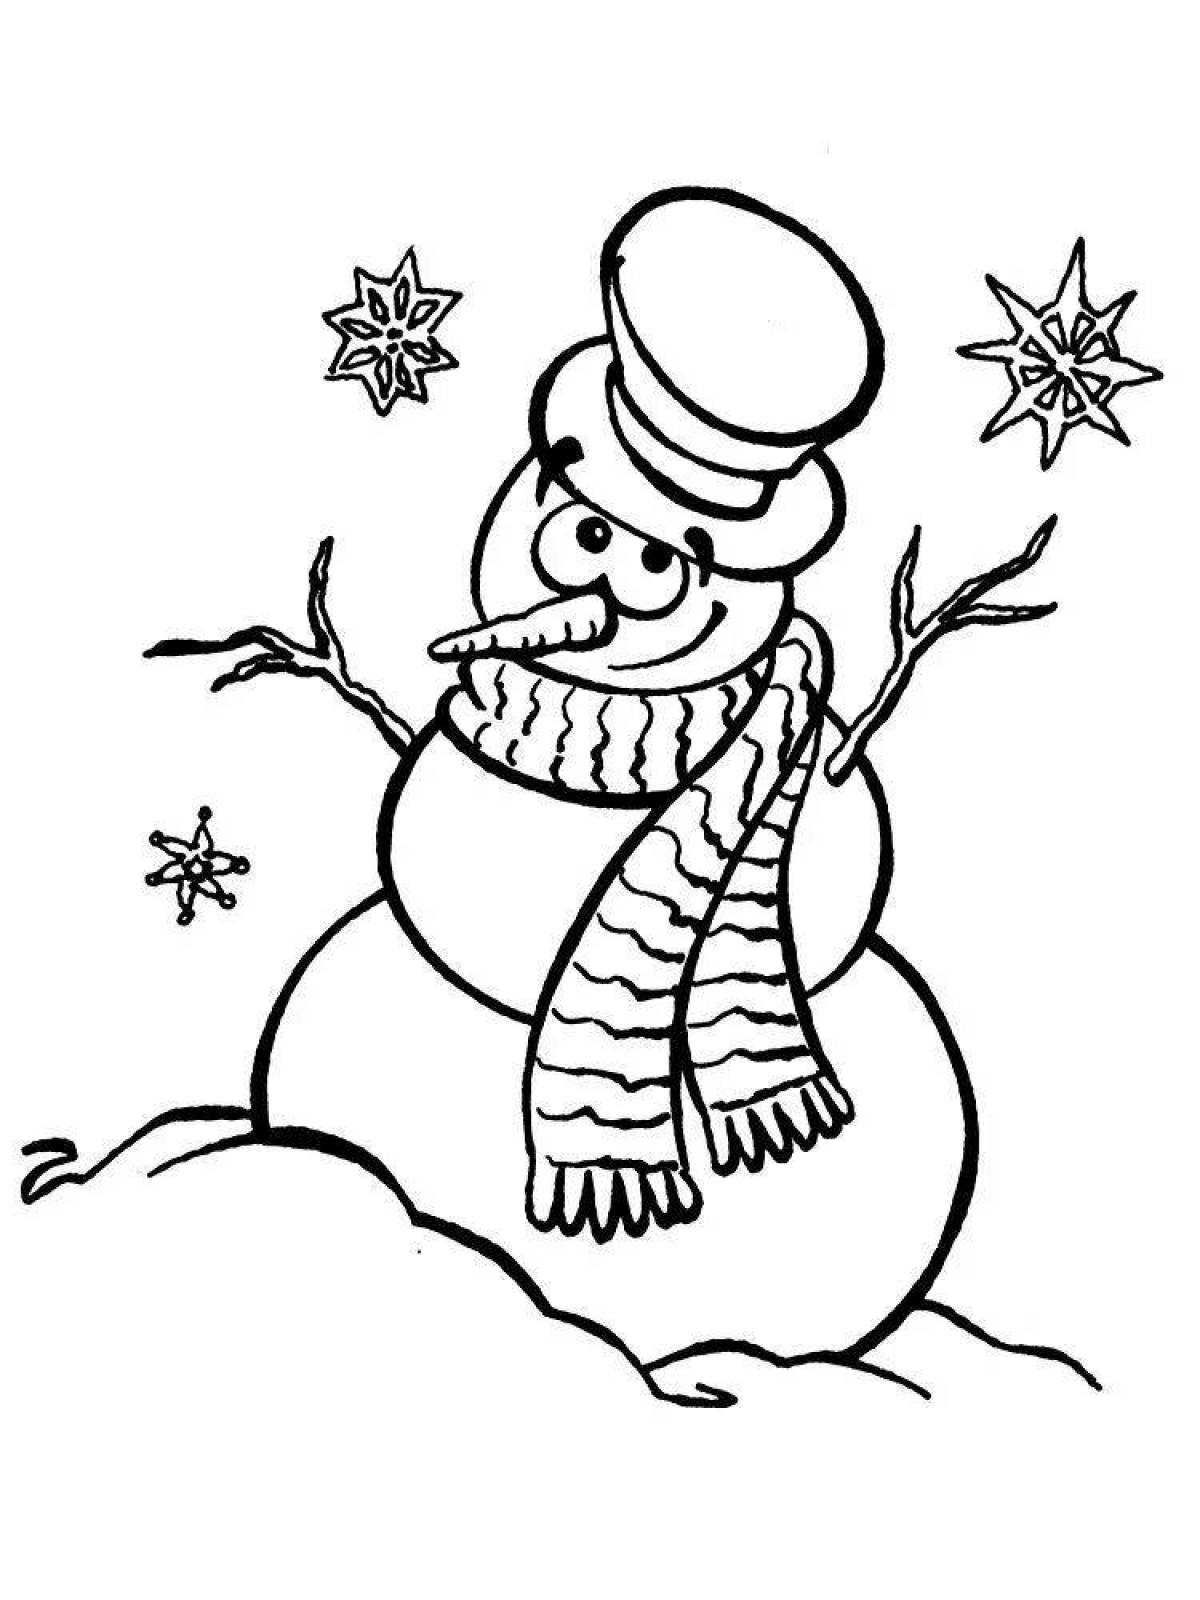 Fabulous Christmas coloring book for children